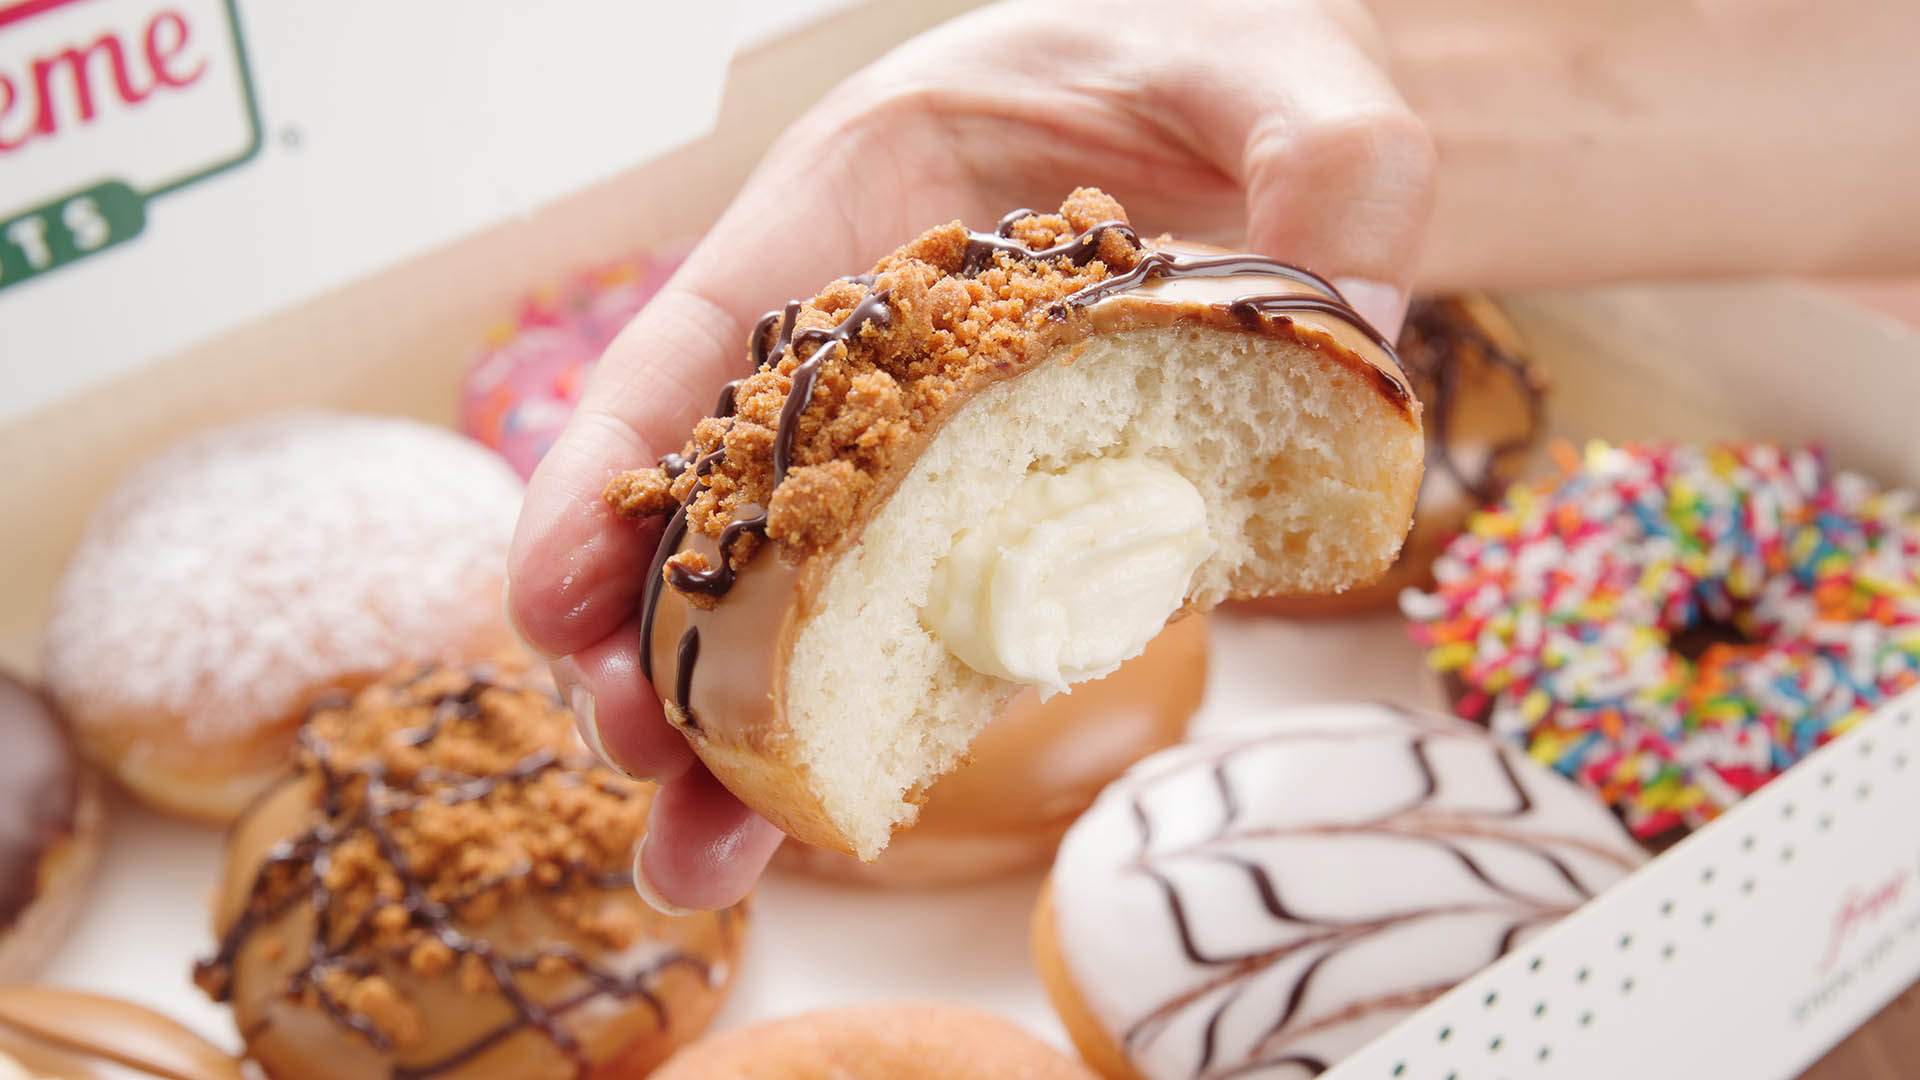 Krispy Kreme Has Just Dropped a Limited-Edition Range of Biscoff Doughnuts